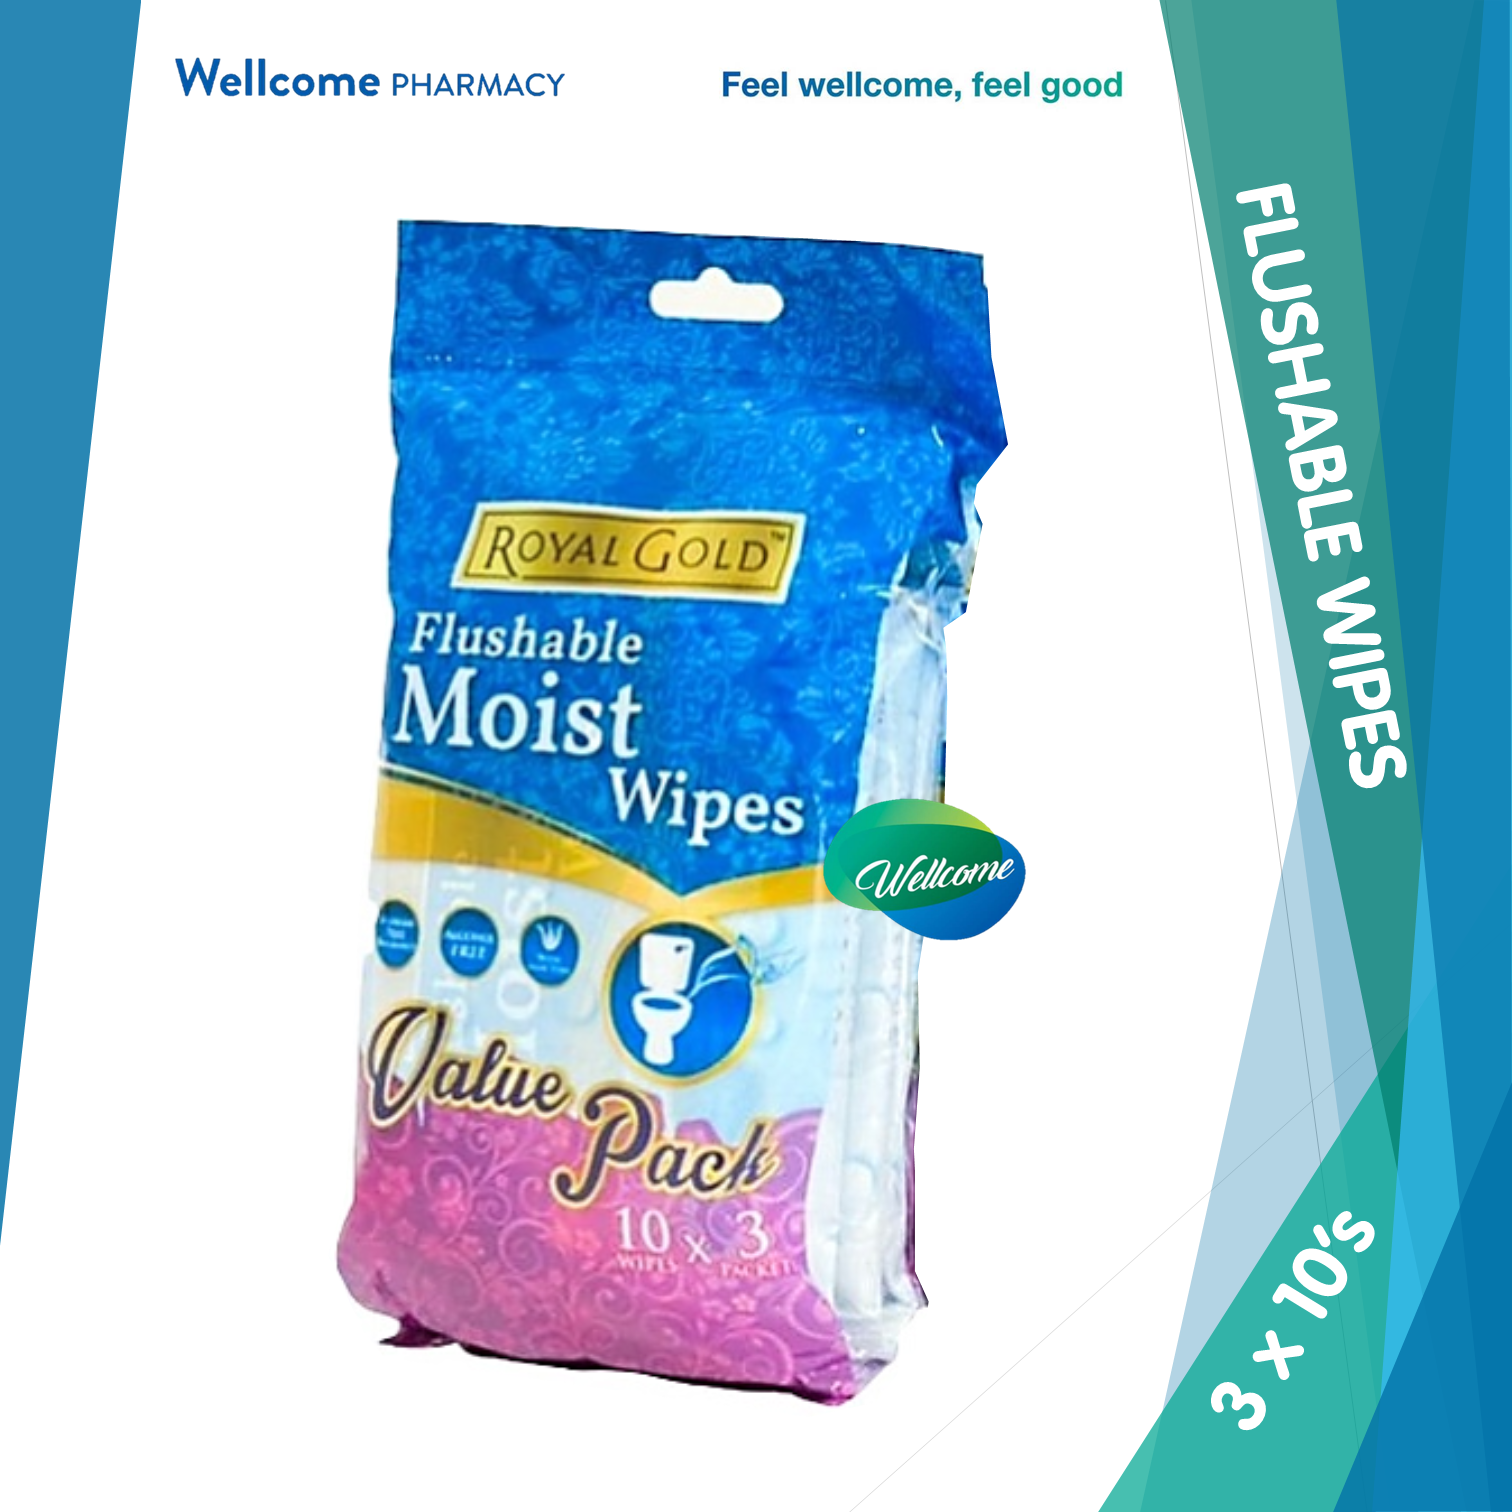 Royal Gold Flushable Moist Wipes - 3x10s.png